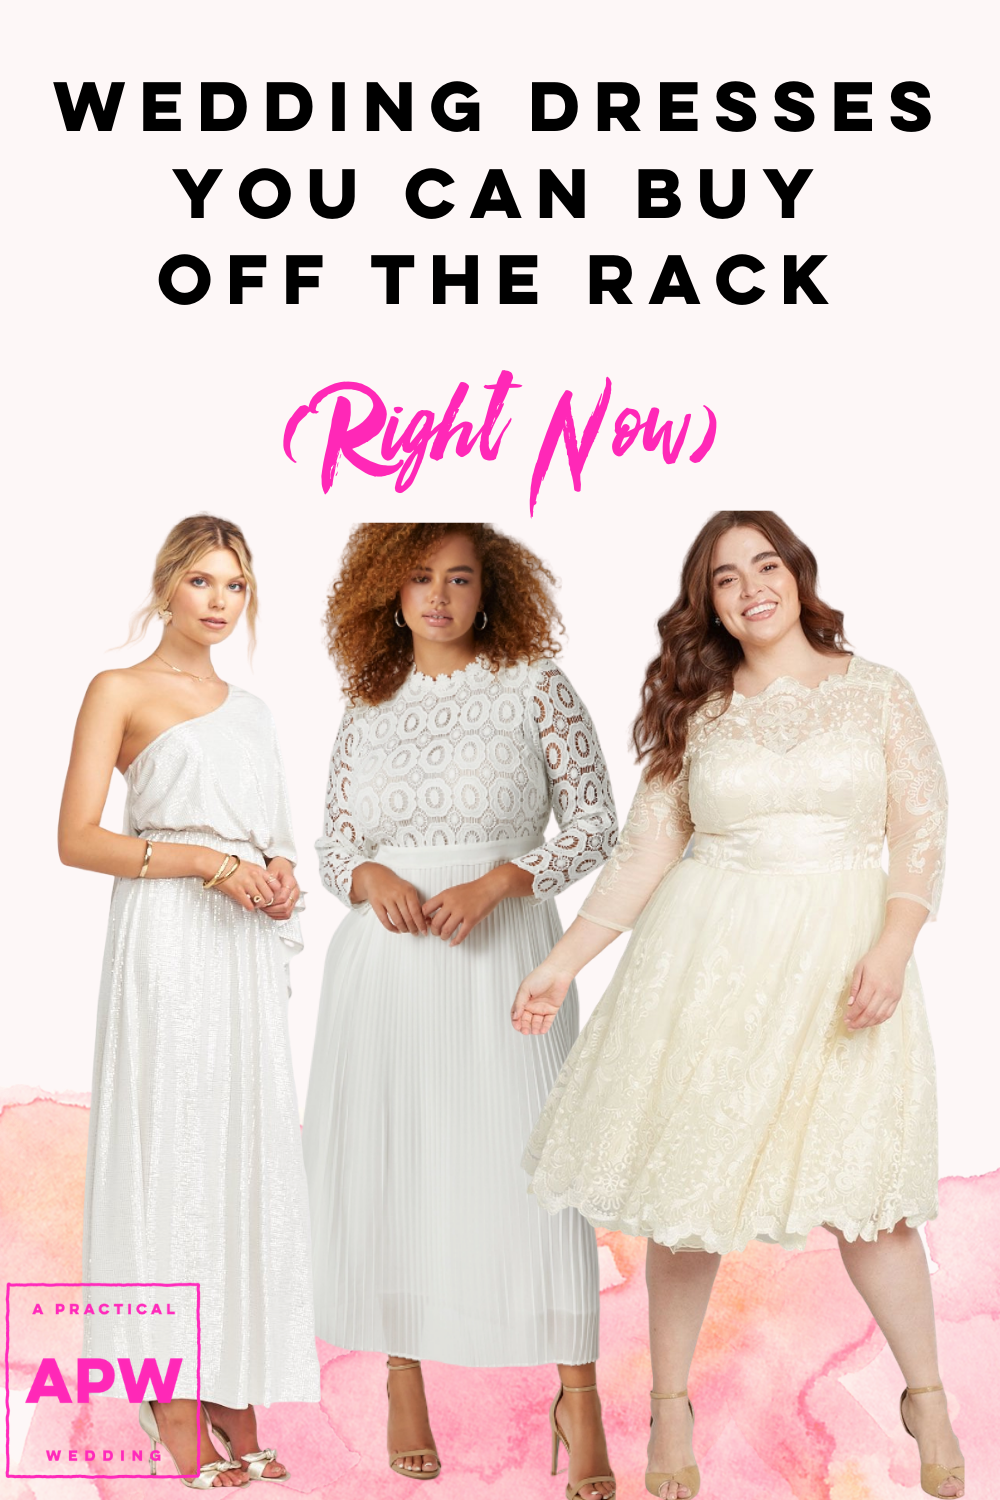 wedding dresses with the text "off the rack wedding dresses you can buy right now"